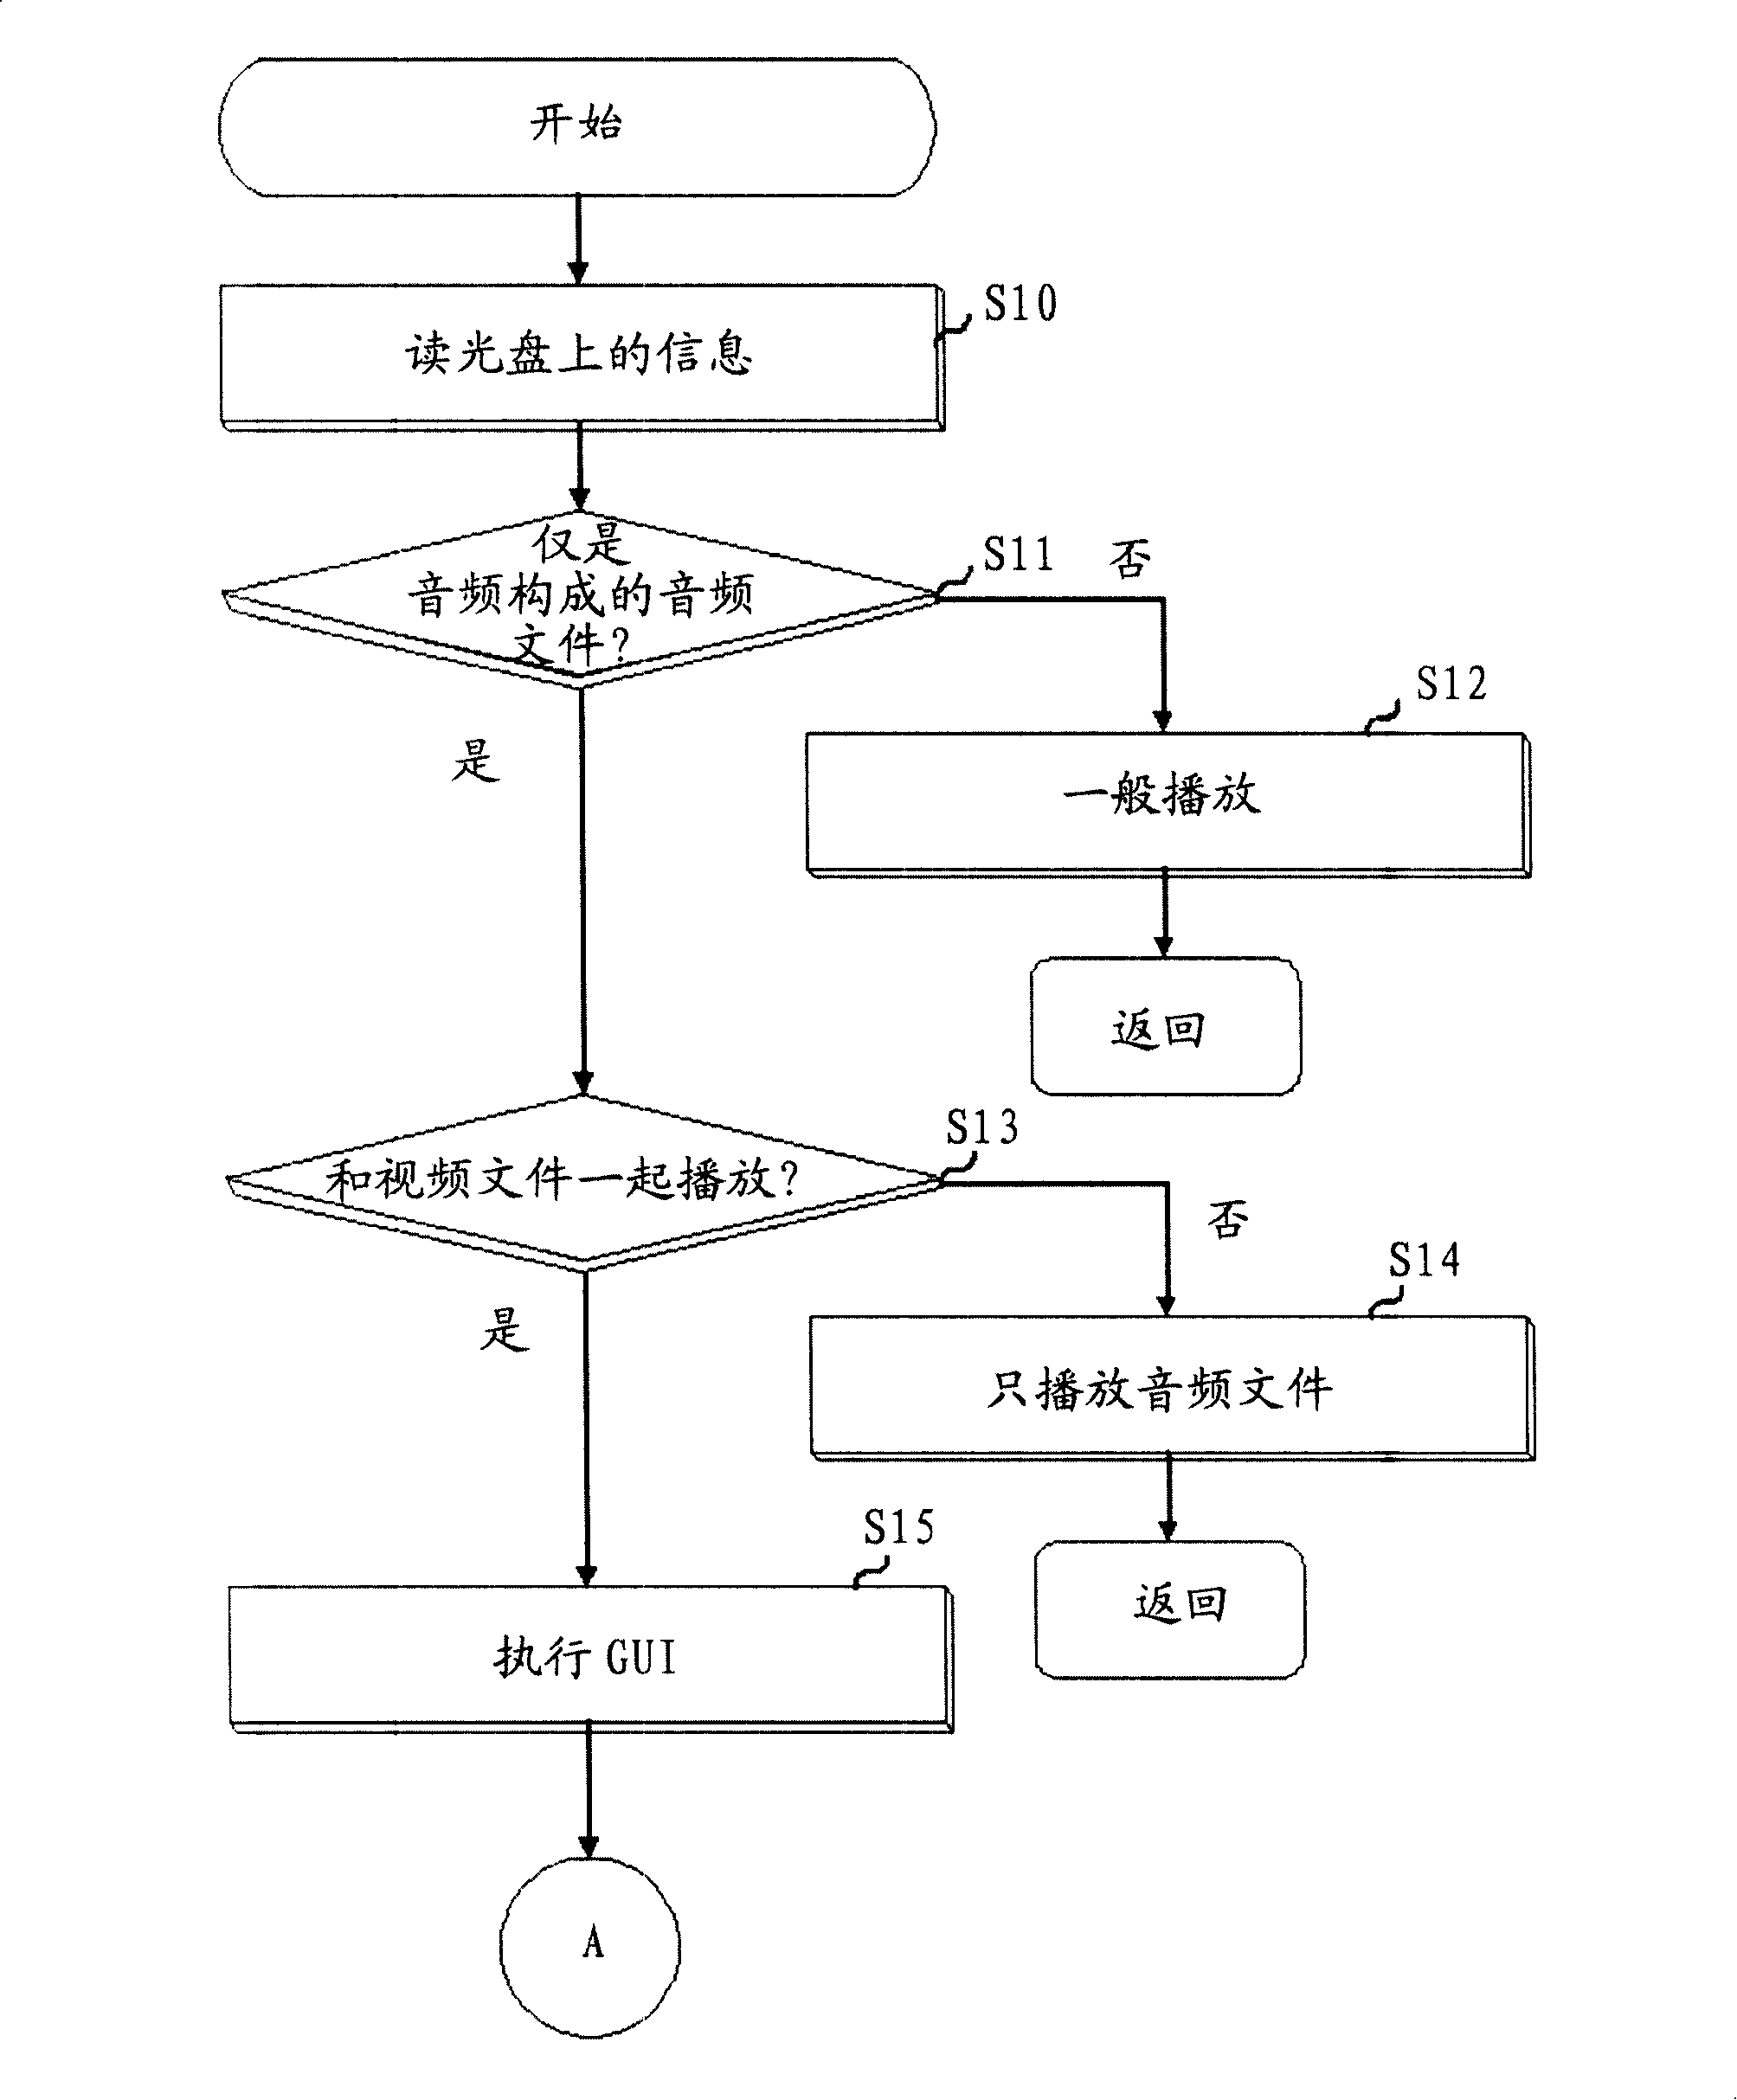 Optical disk player background image embodiment equipment and method